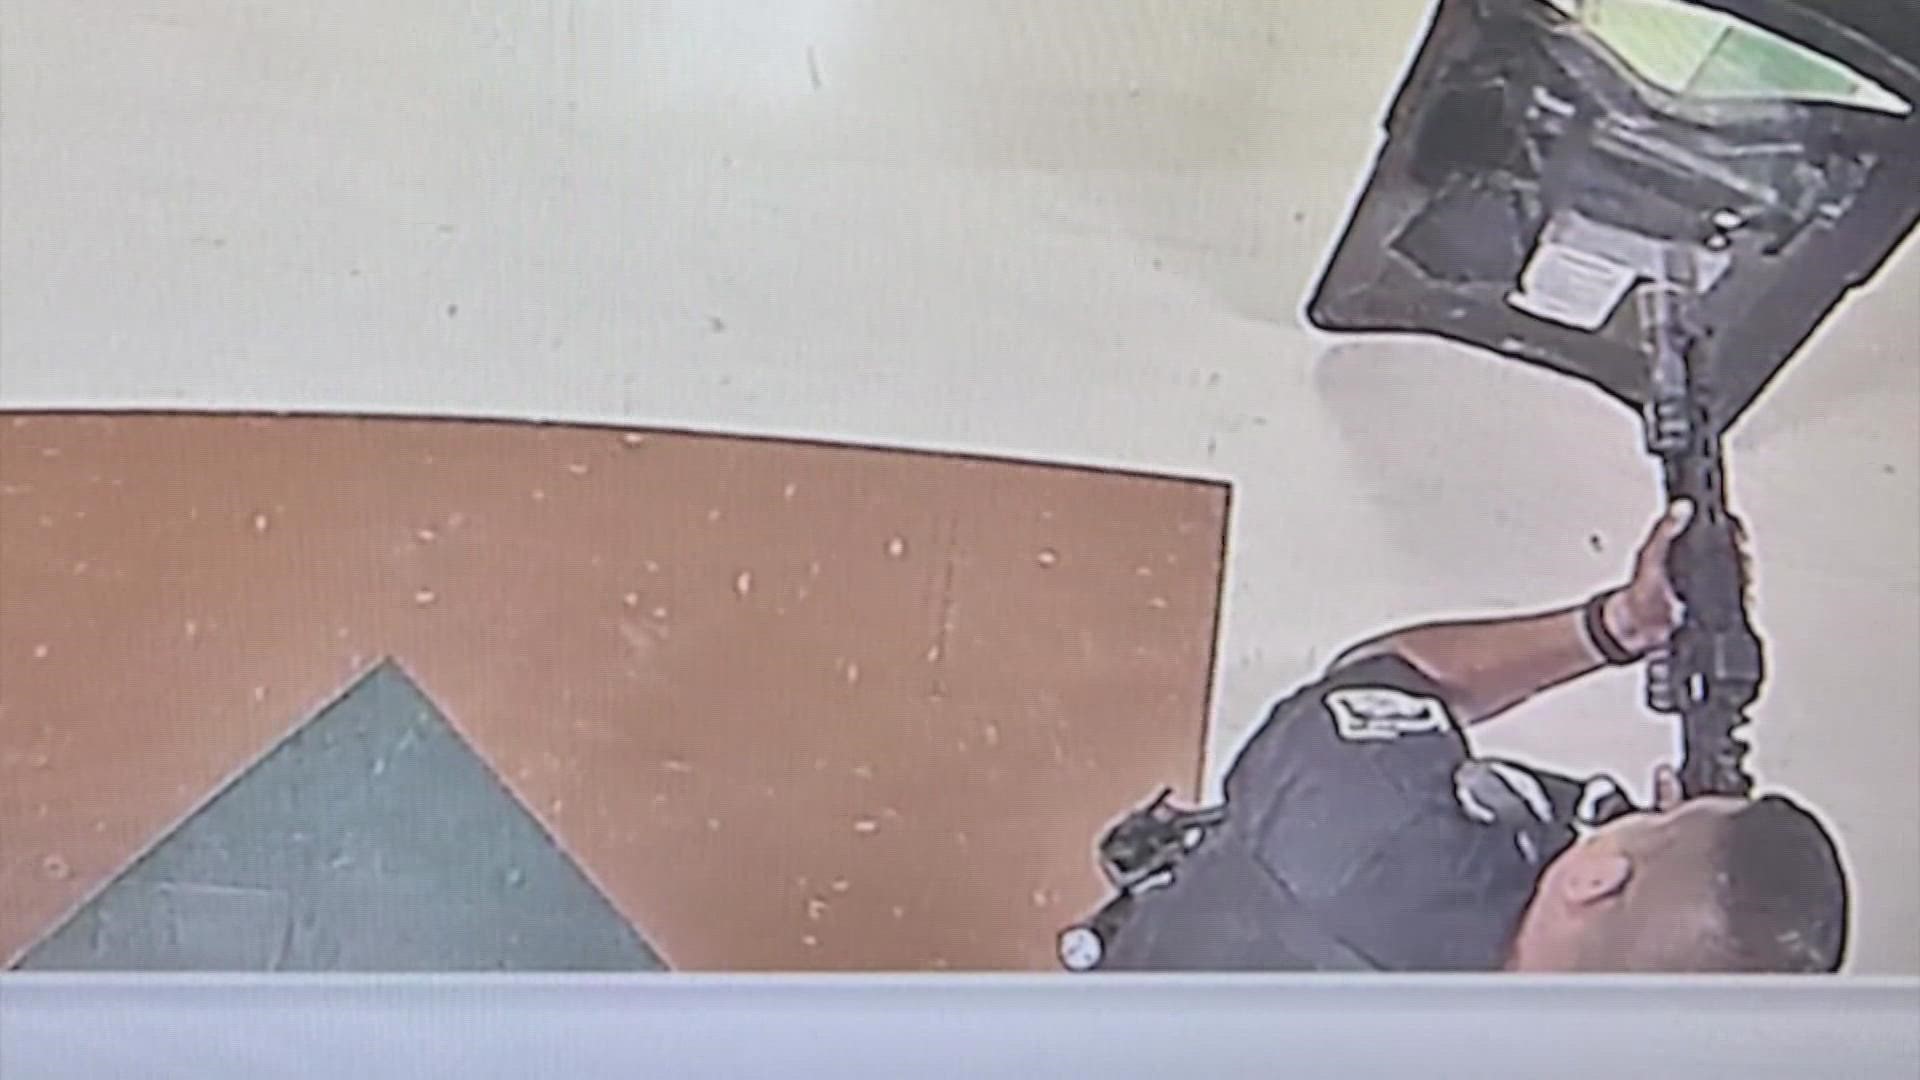 Texas lawmakers are hoping unreleased surveillance video captured the day of the mass shooting at Robb Elementary School will be released within the next week.